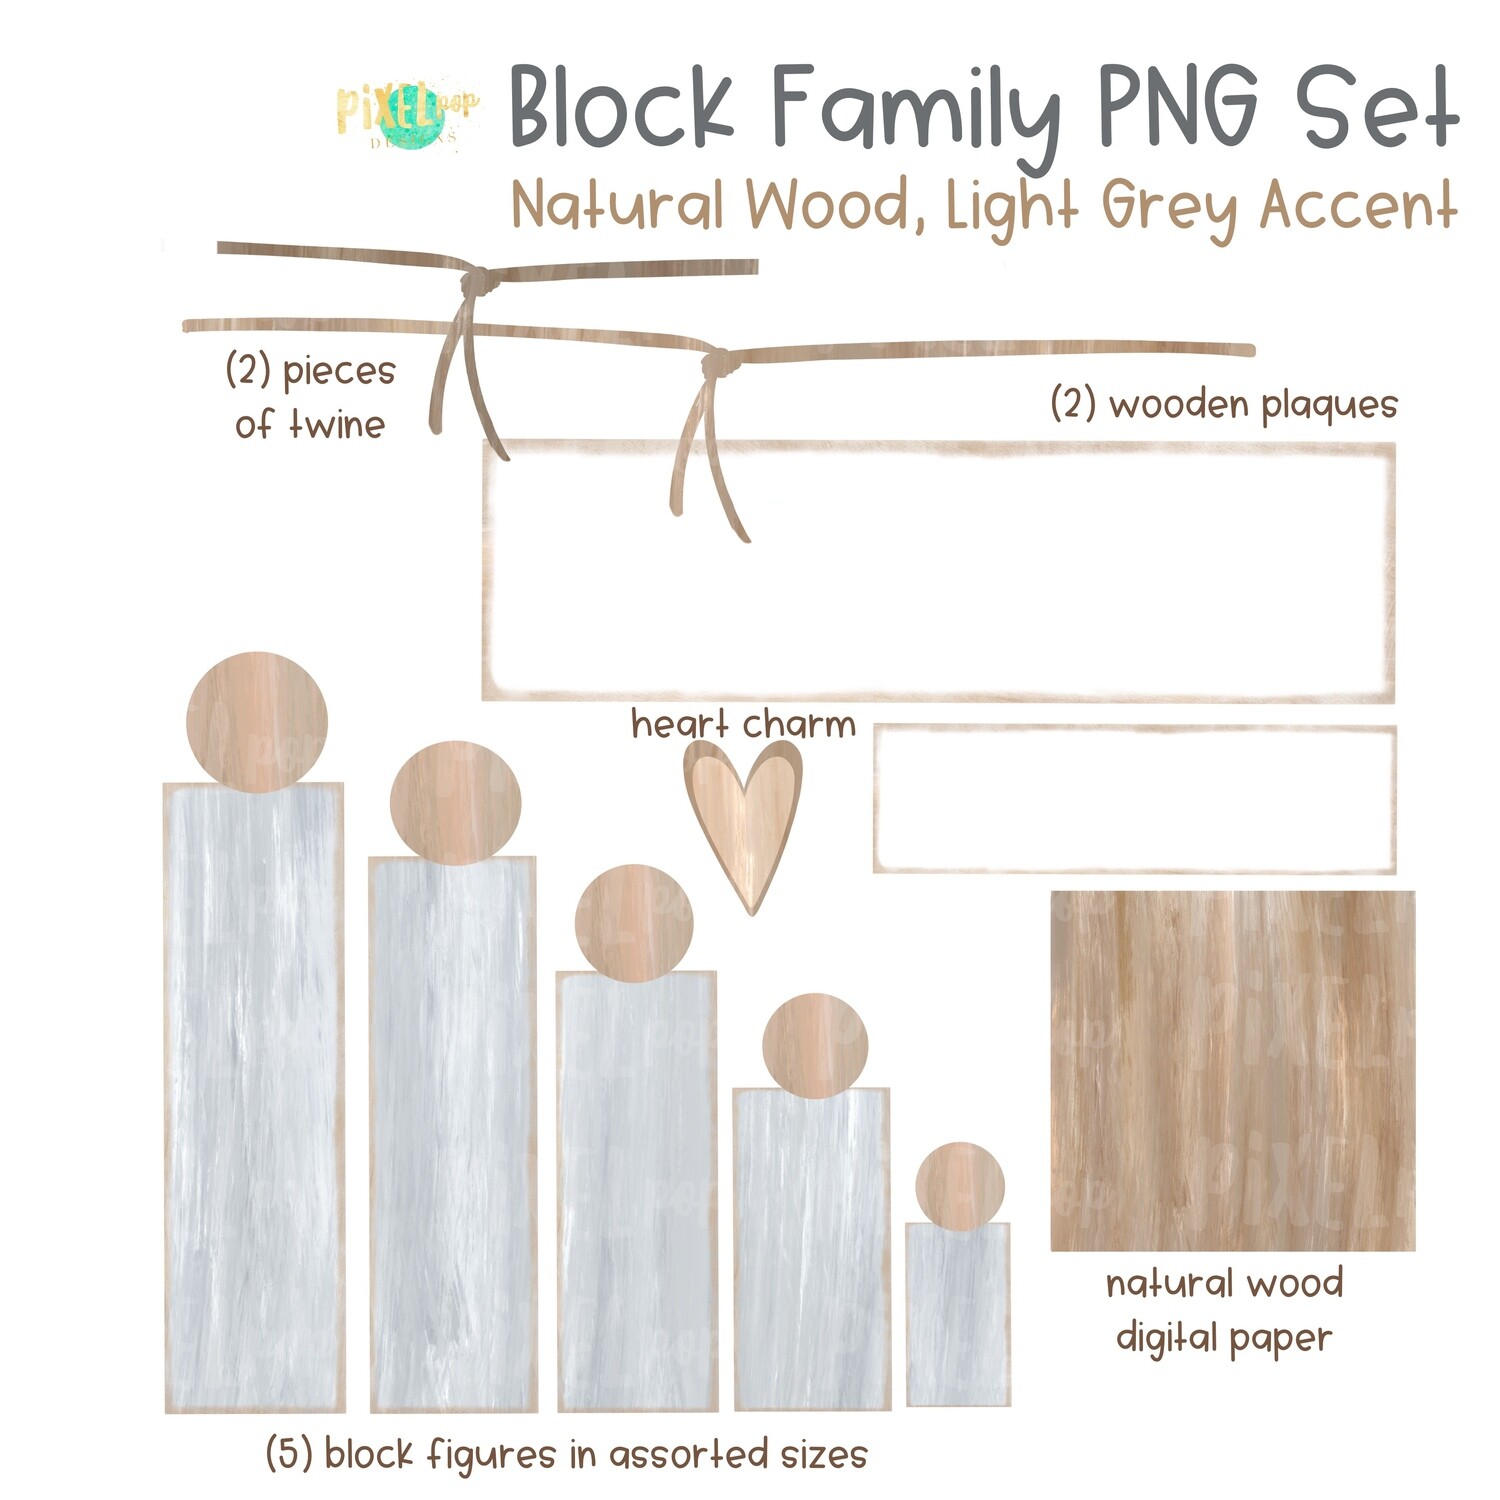 Wooden Block Family PNG Set Natural Wood Light Grey Accents with Accessories | Family Portrait Art | Wooden Blocks | Family Design